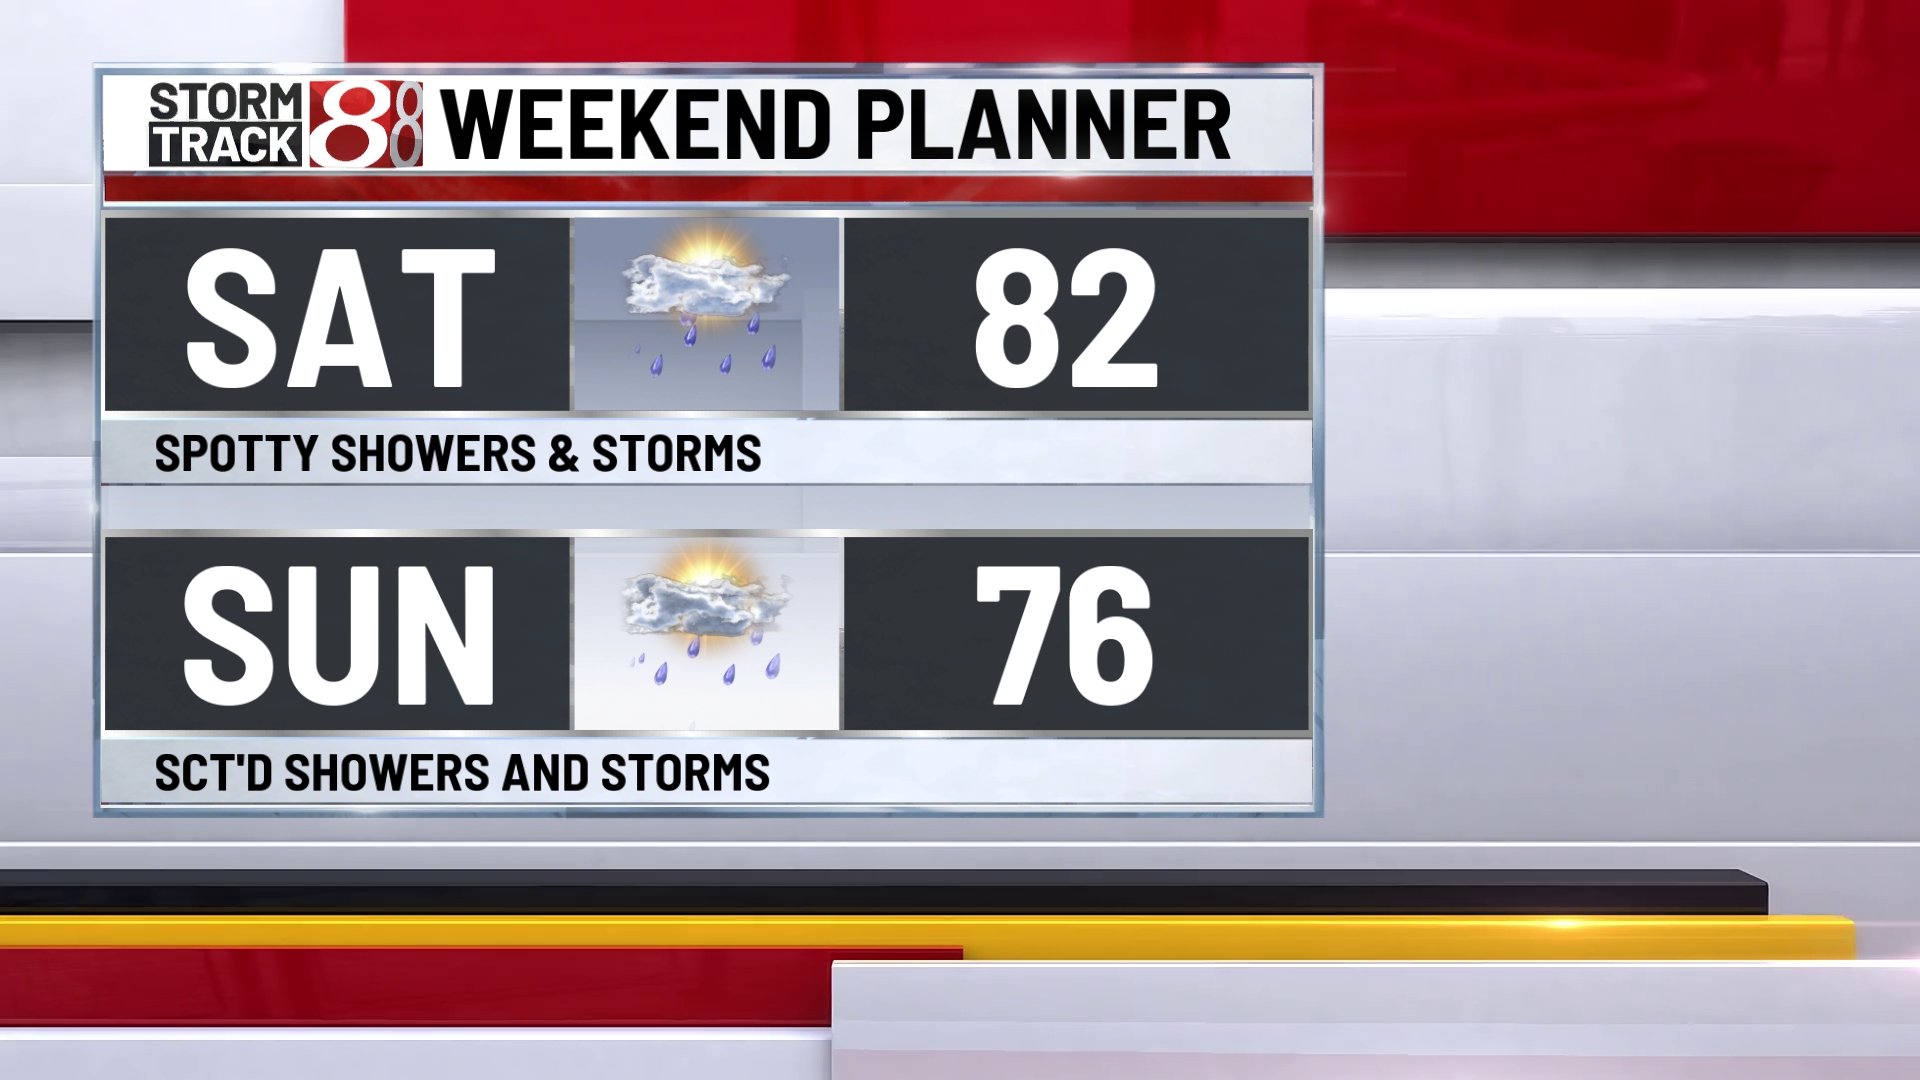 Humidity and rain chances return for the weekend